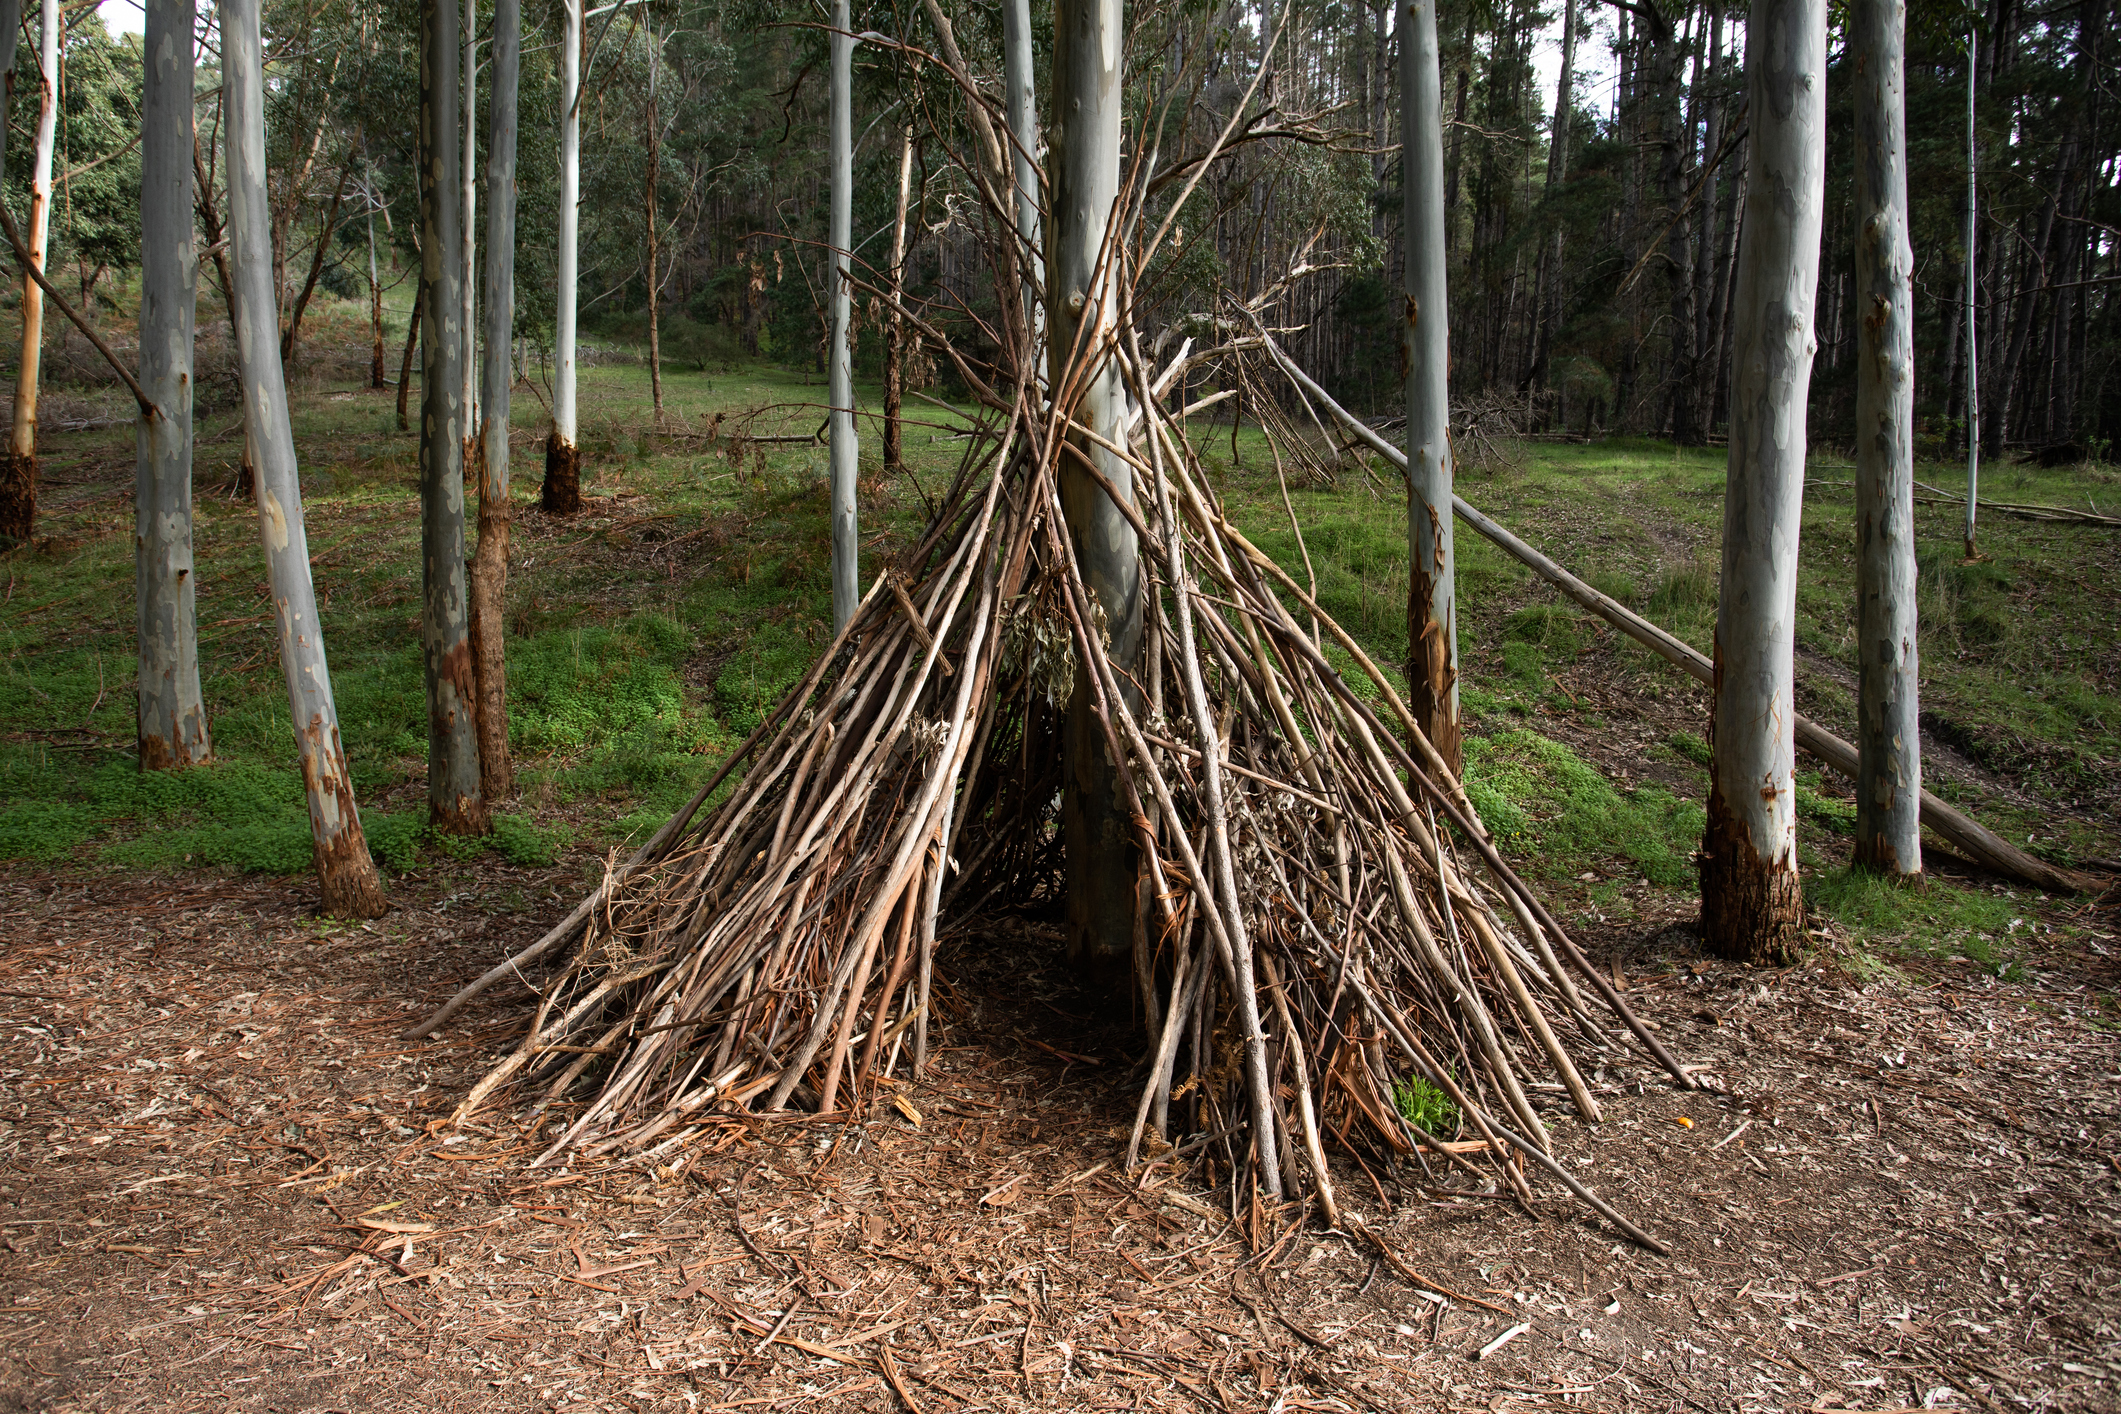 A wooden shelter in the forest in Fleurieu Peninsula, South Australia.